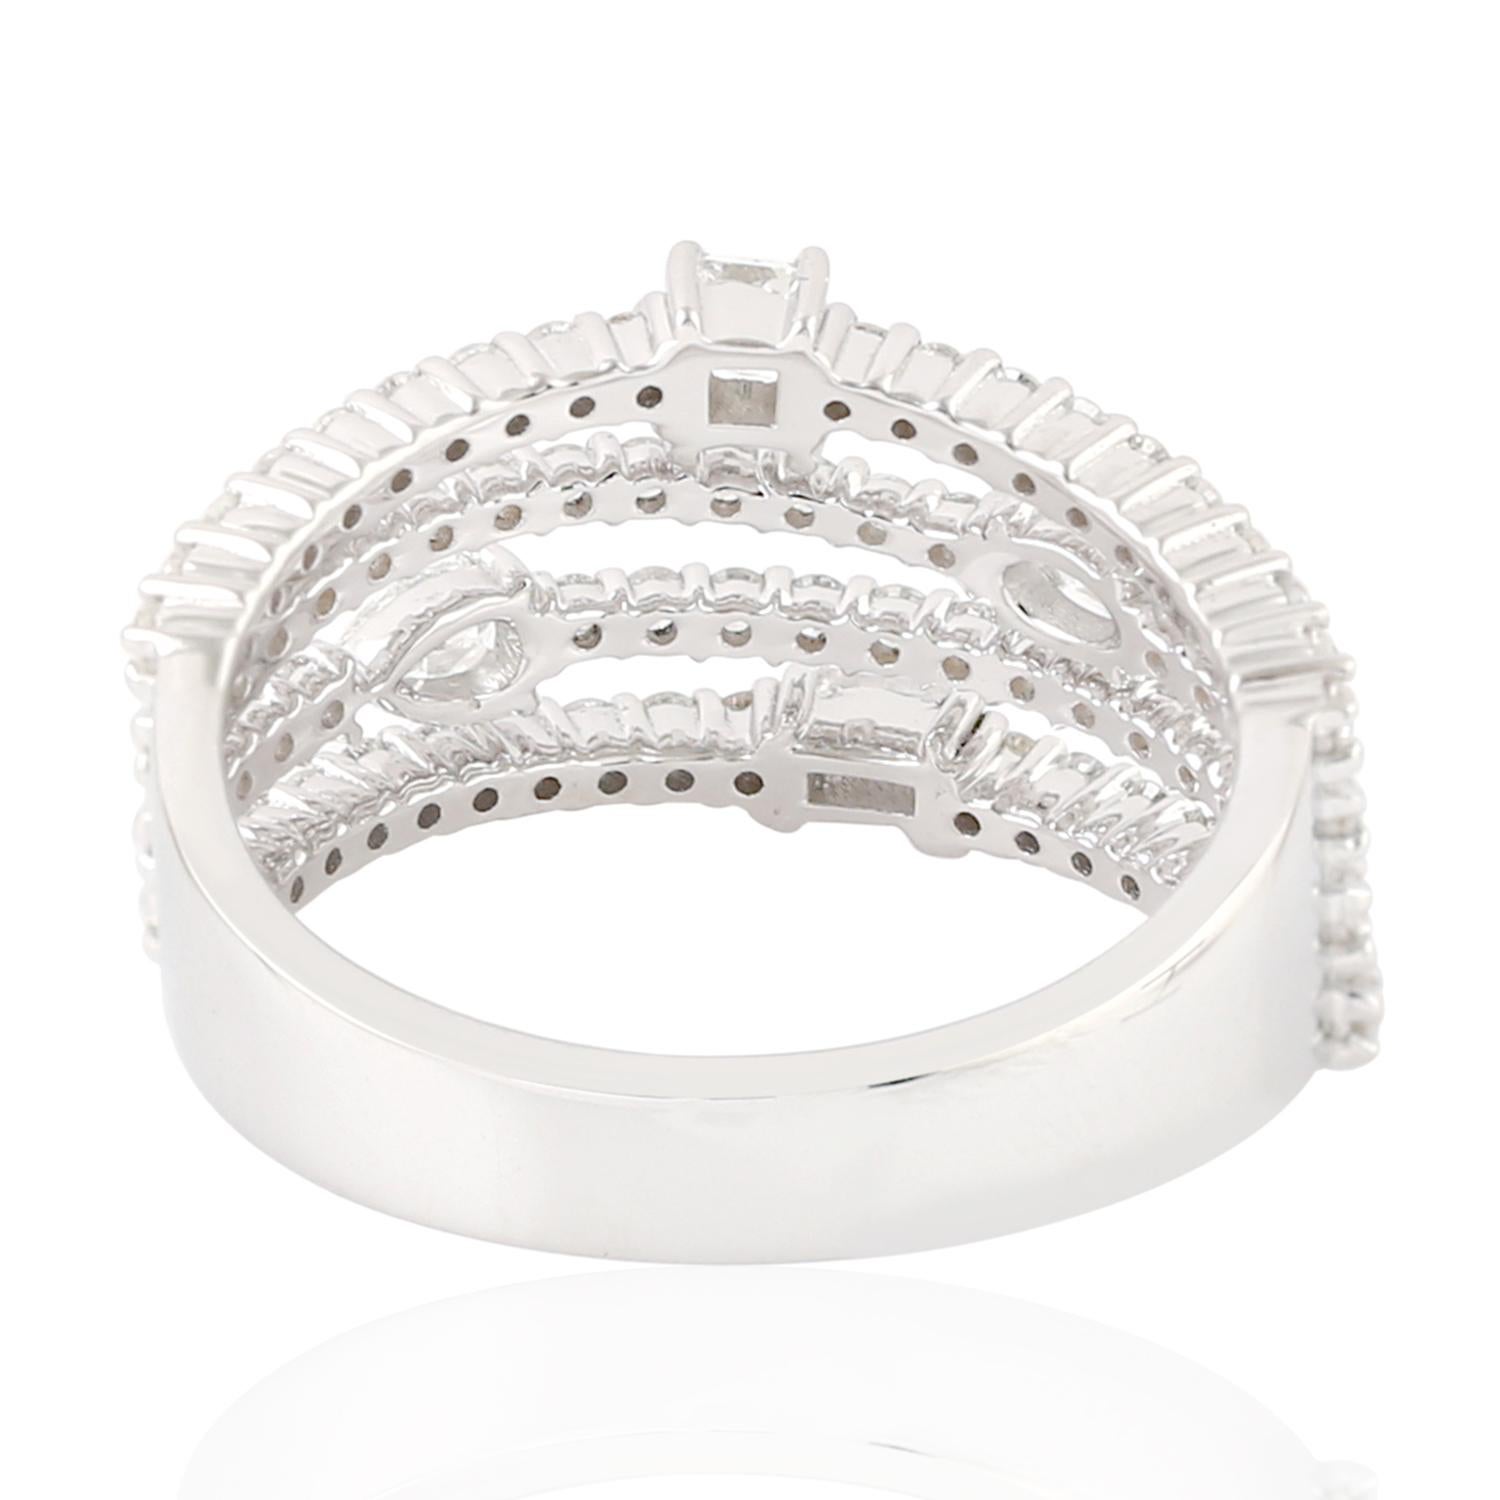 Art Deco Fancy Diamond Band Ring With Pave Diamonds Made In 18k White Gold For Sale